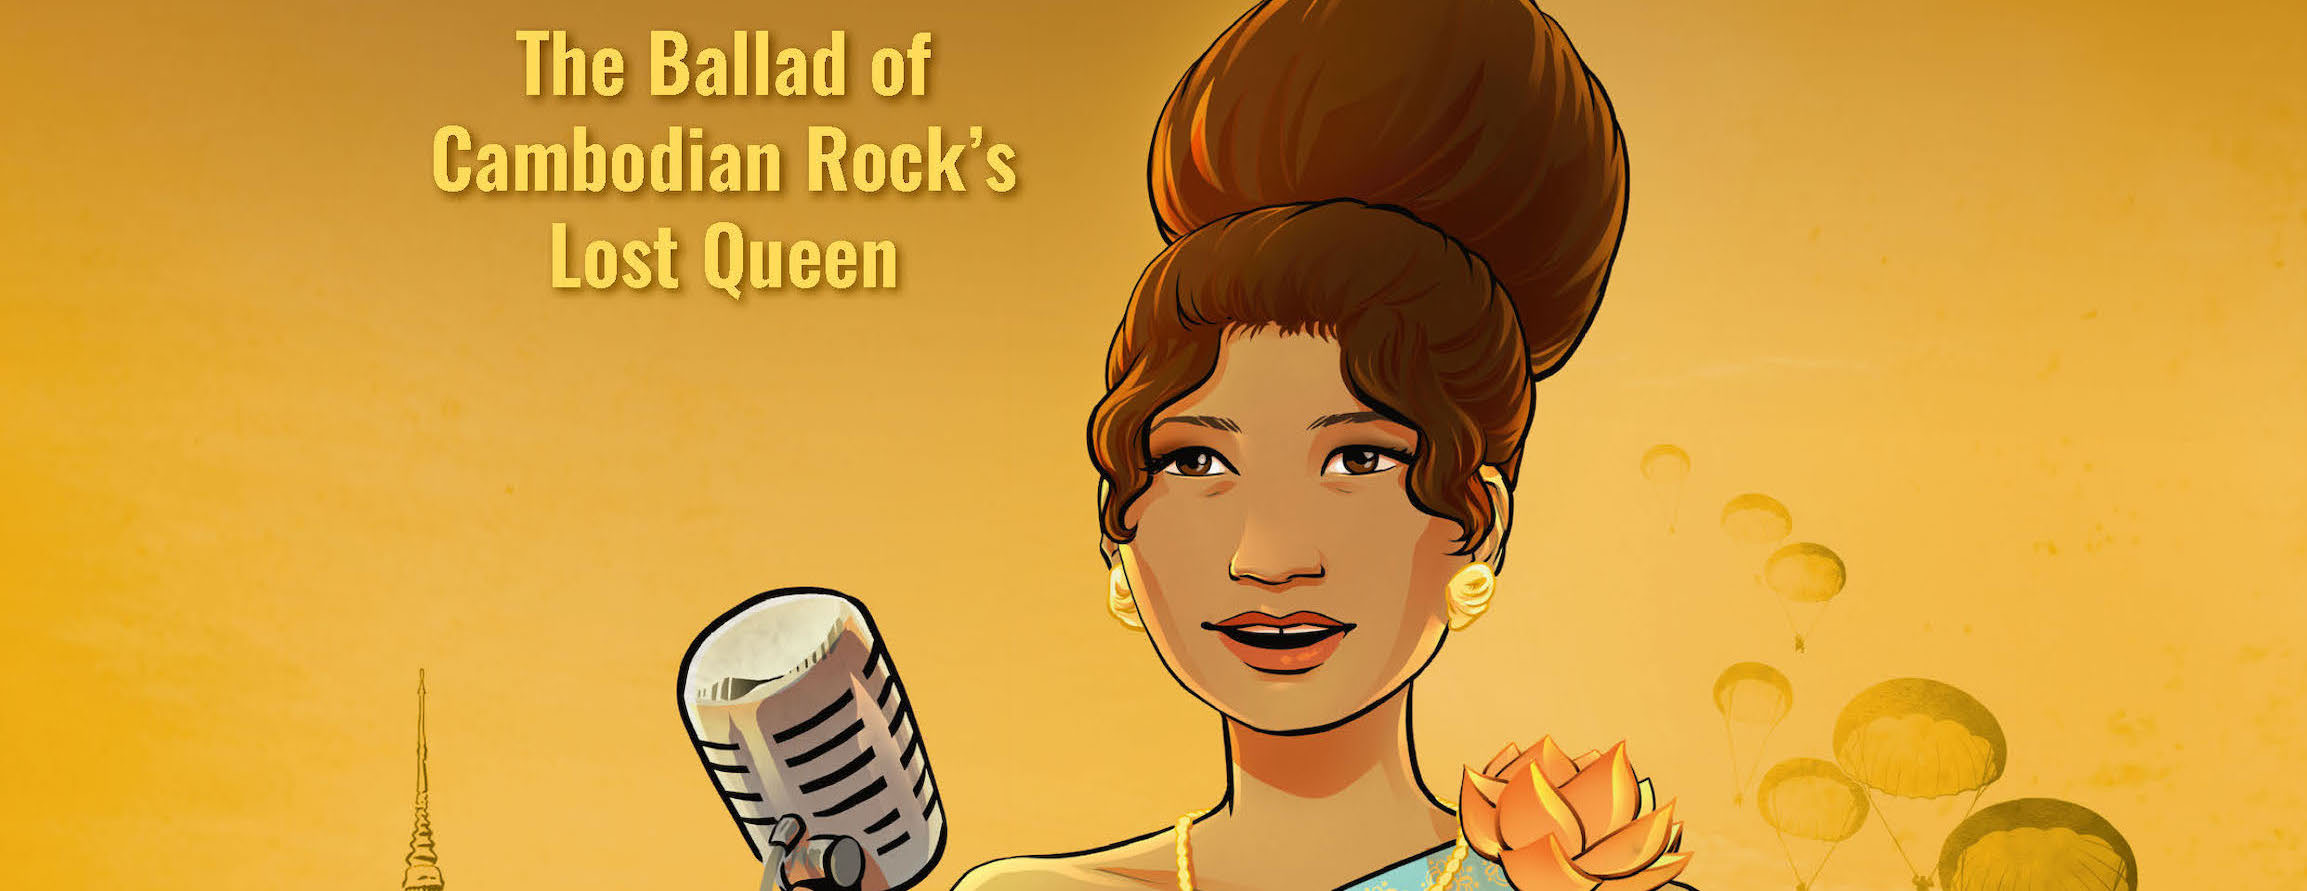 EXCLUSIVE Humanoids Preview: The Golden Voice: The Ballad of Cambodian Rock's Lost Queen